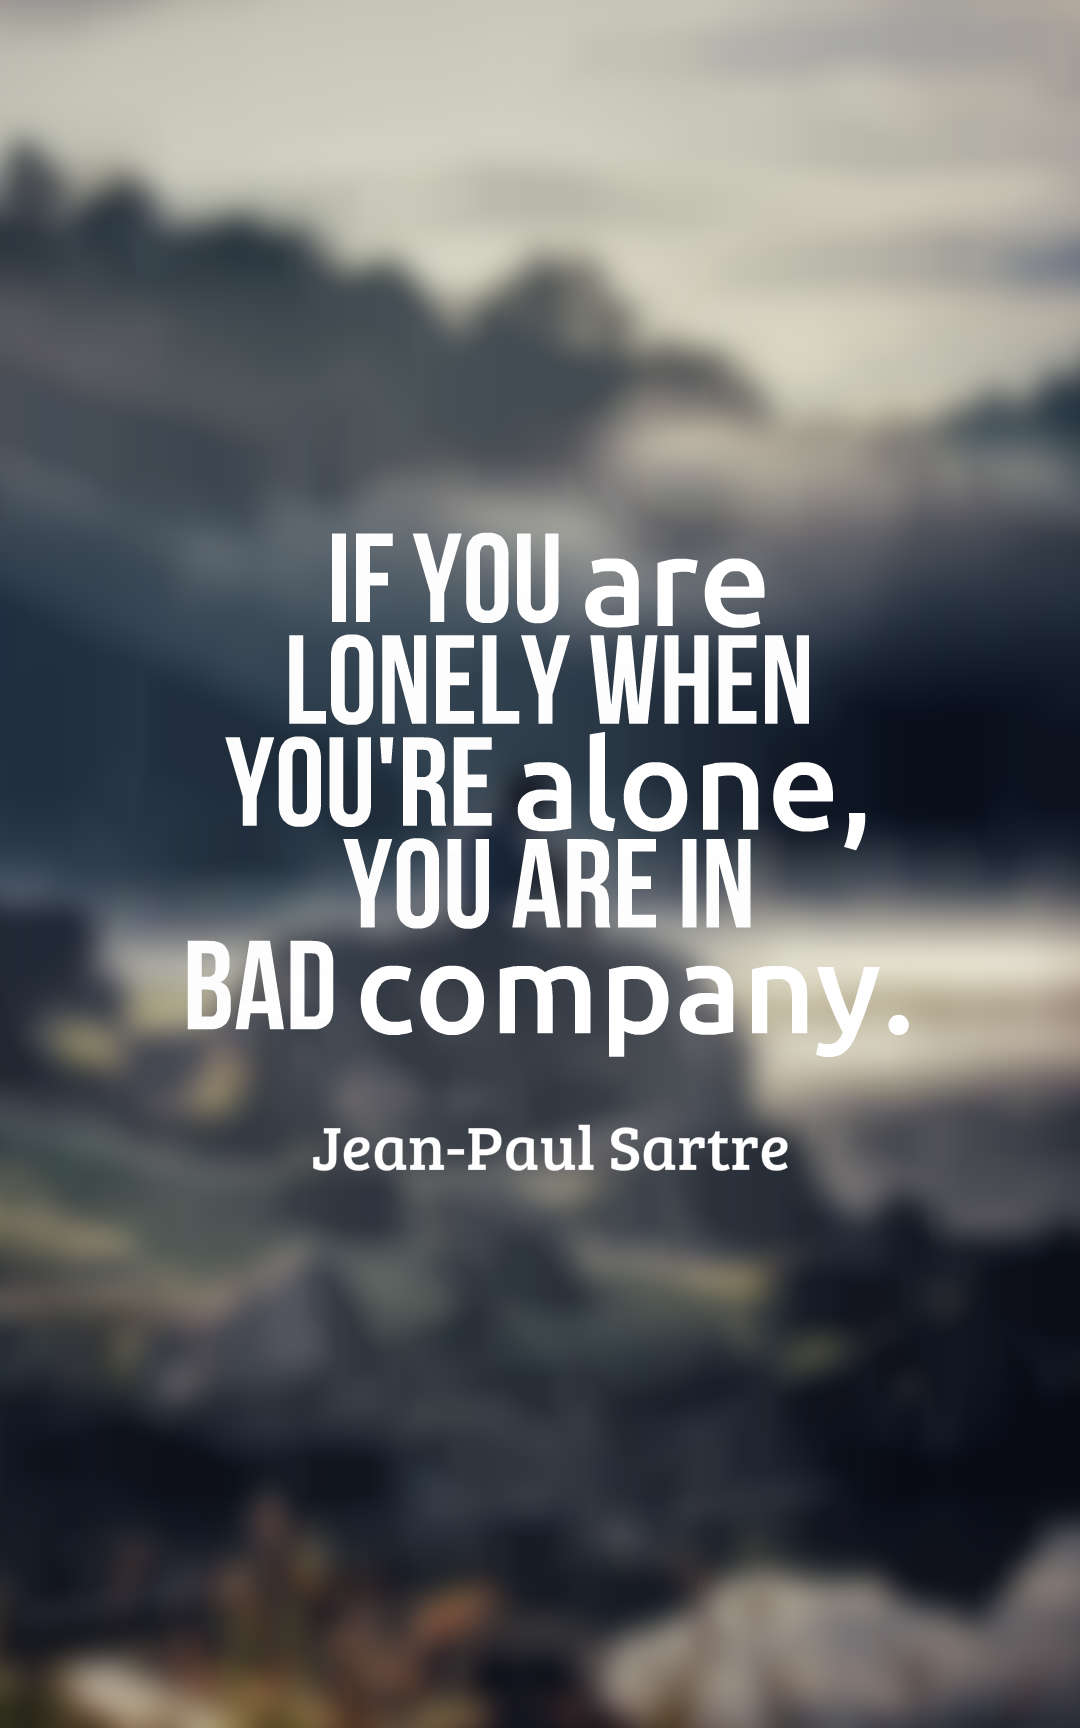 If you are lonely when you’re alone, you are in bad company. Jean-Paul Sartre